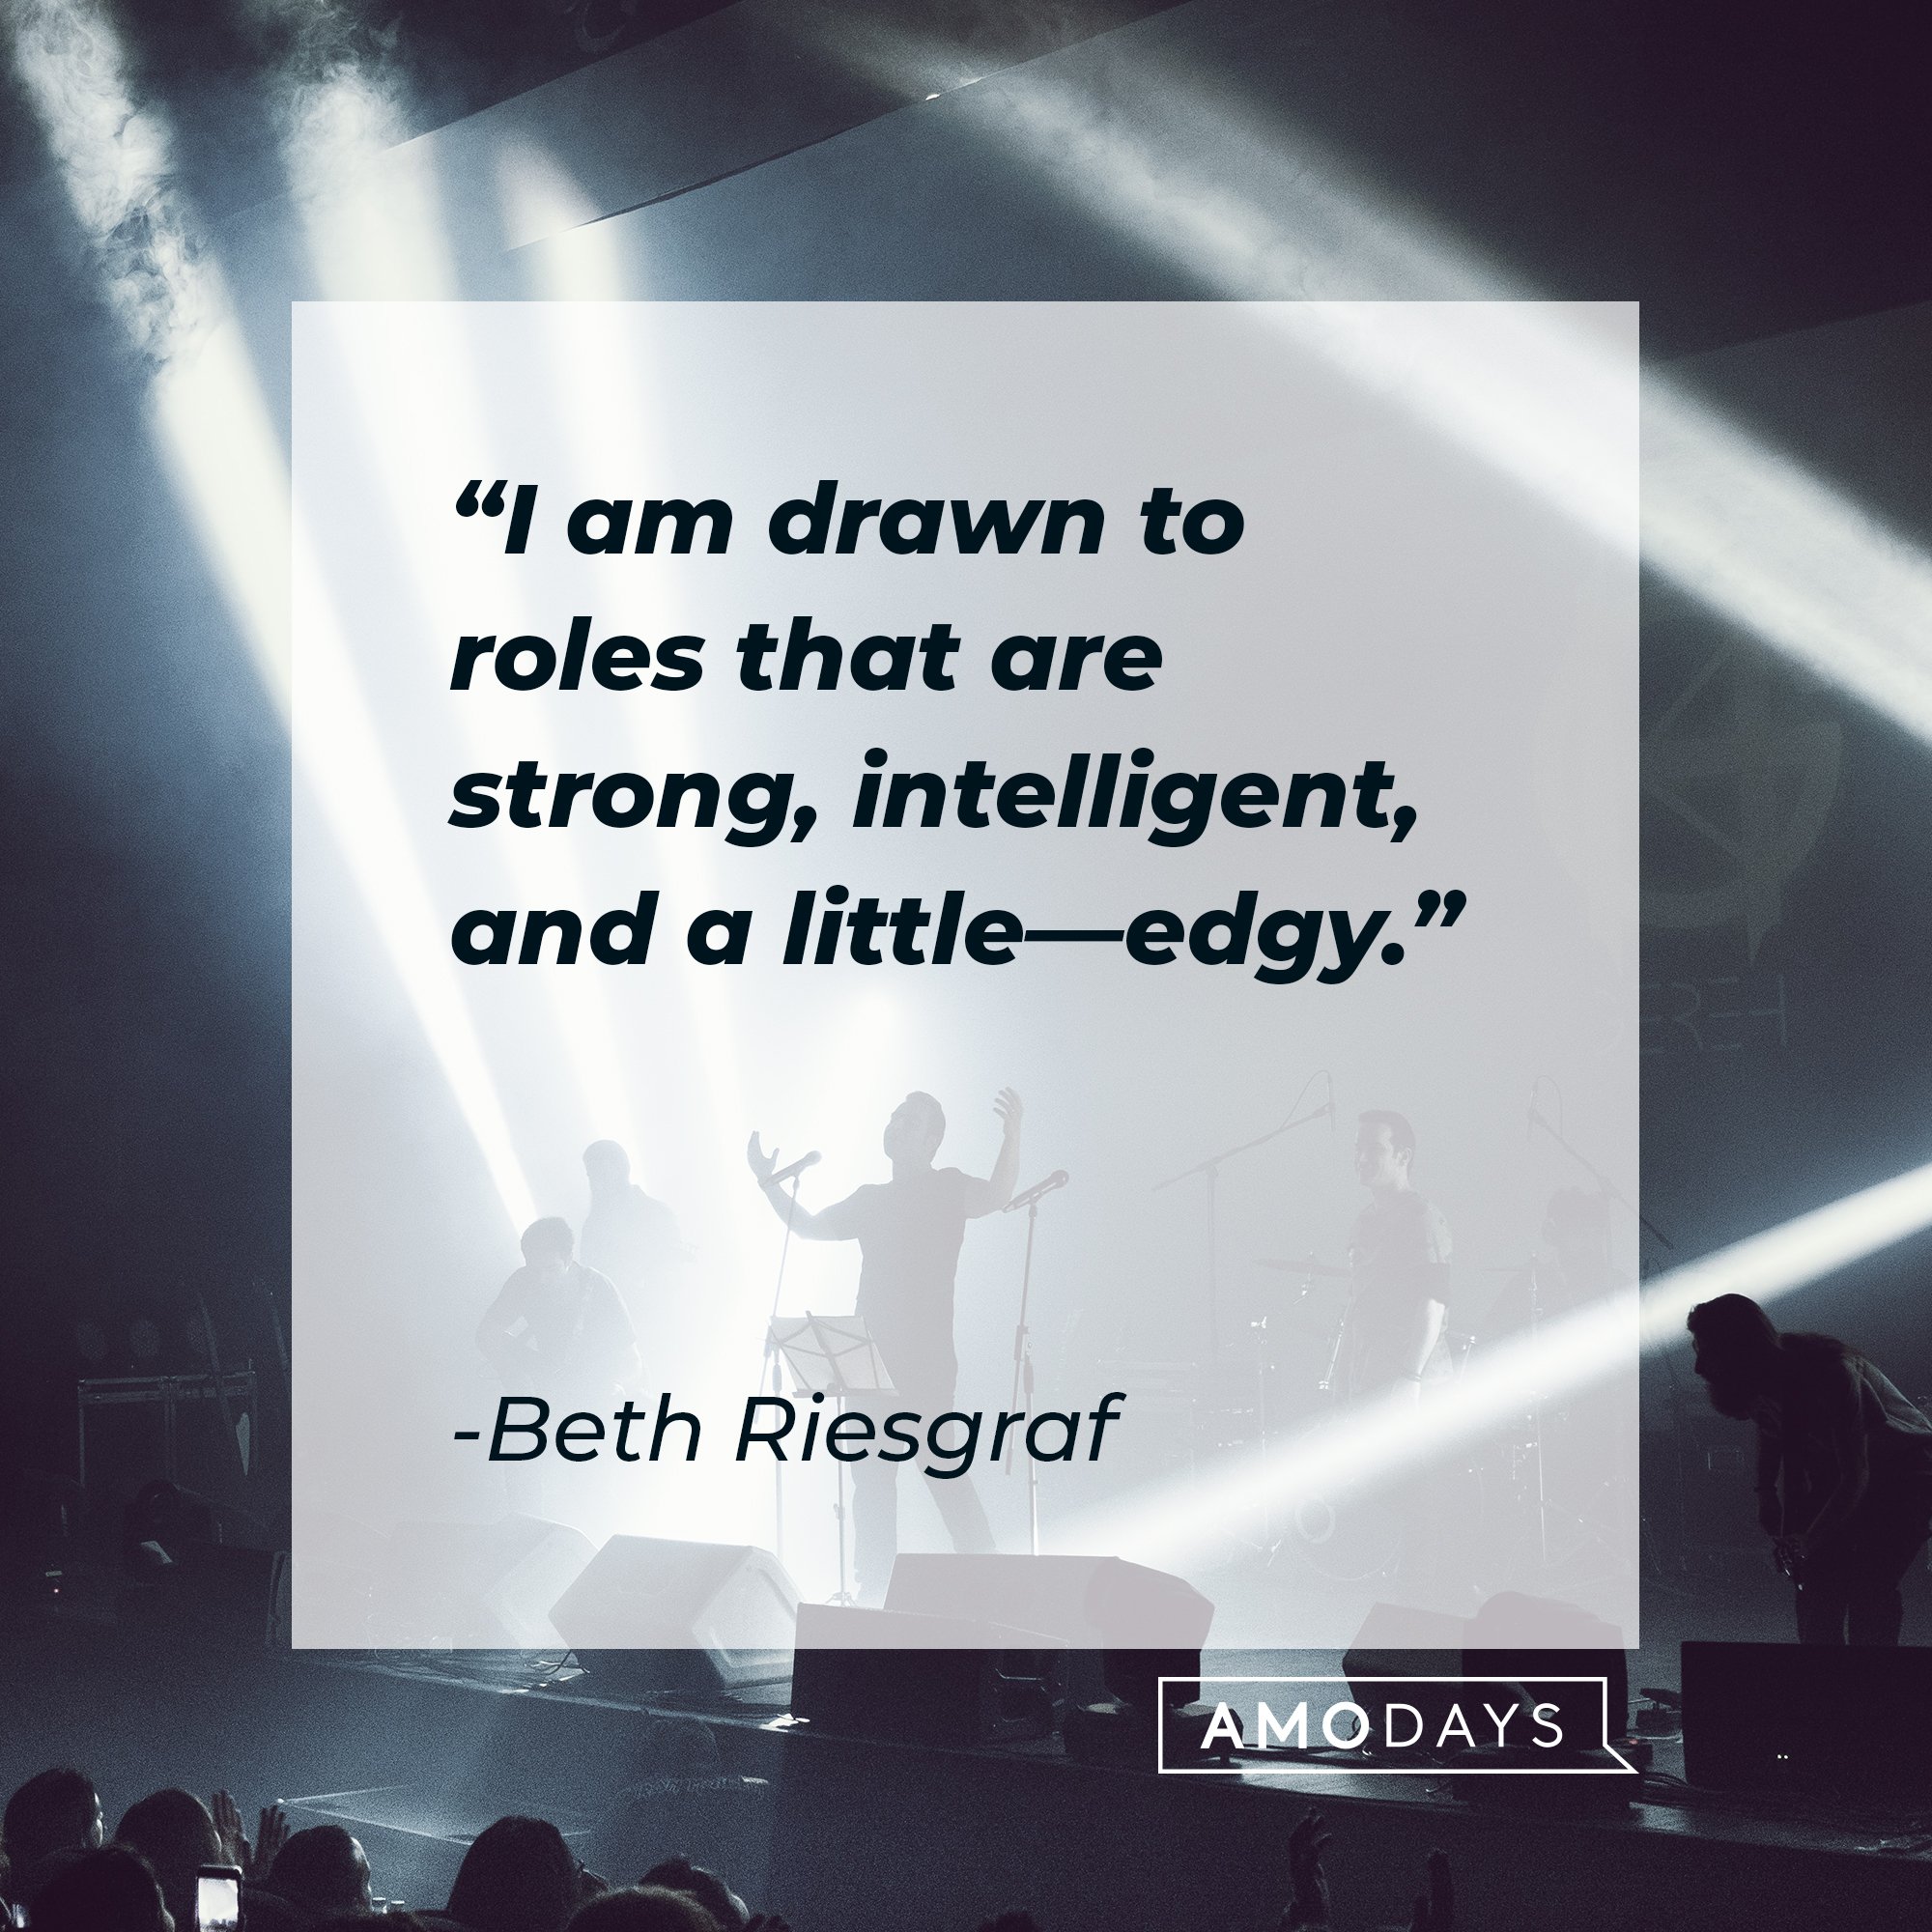 Beth Riesgraf’s quote: "I am drawn to roles that are strong, intelligent, and a little—edgy." | Image: AmoDays